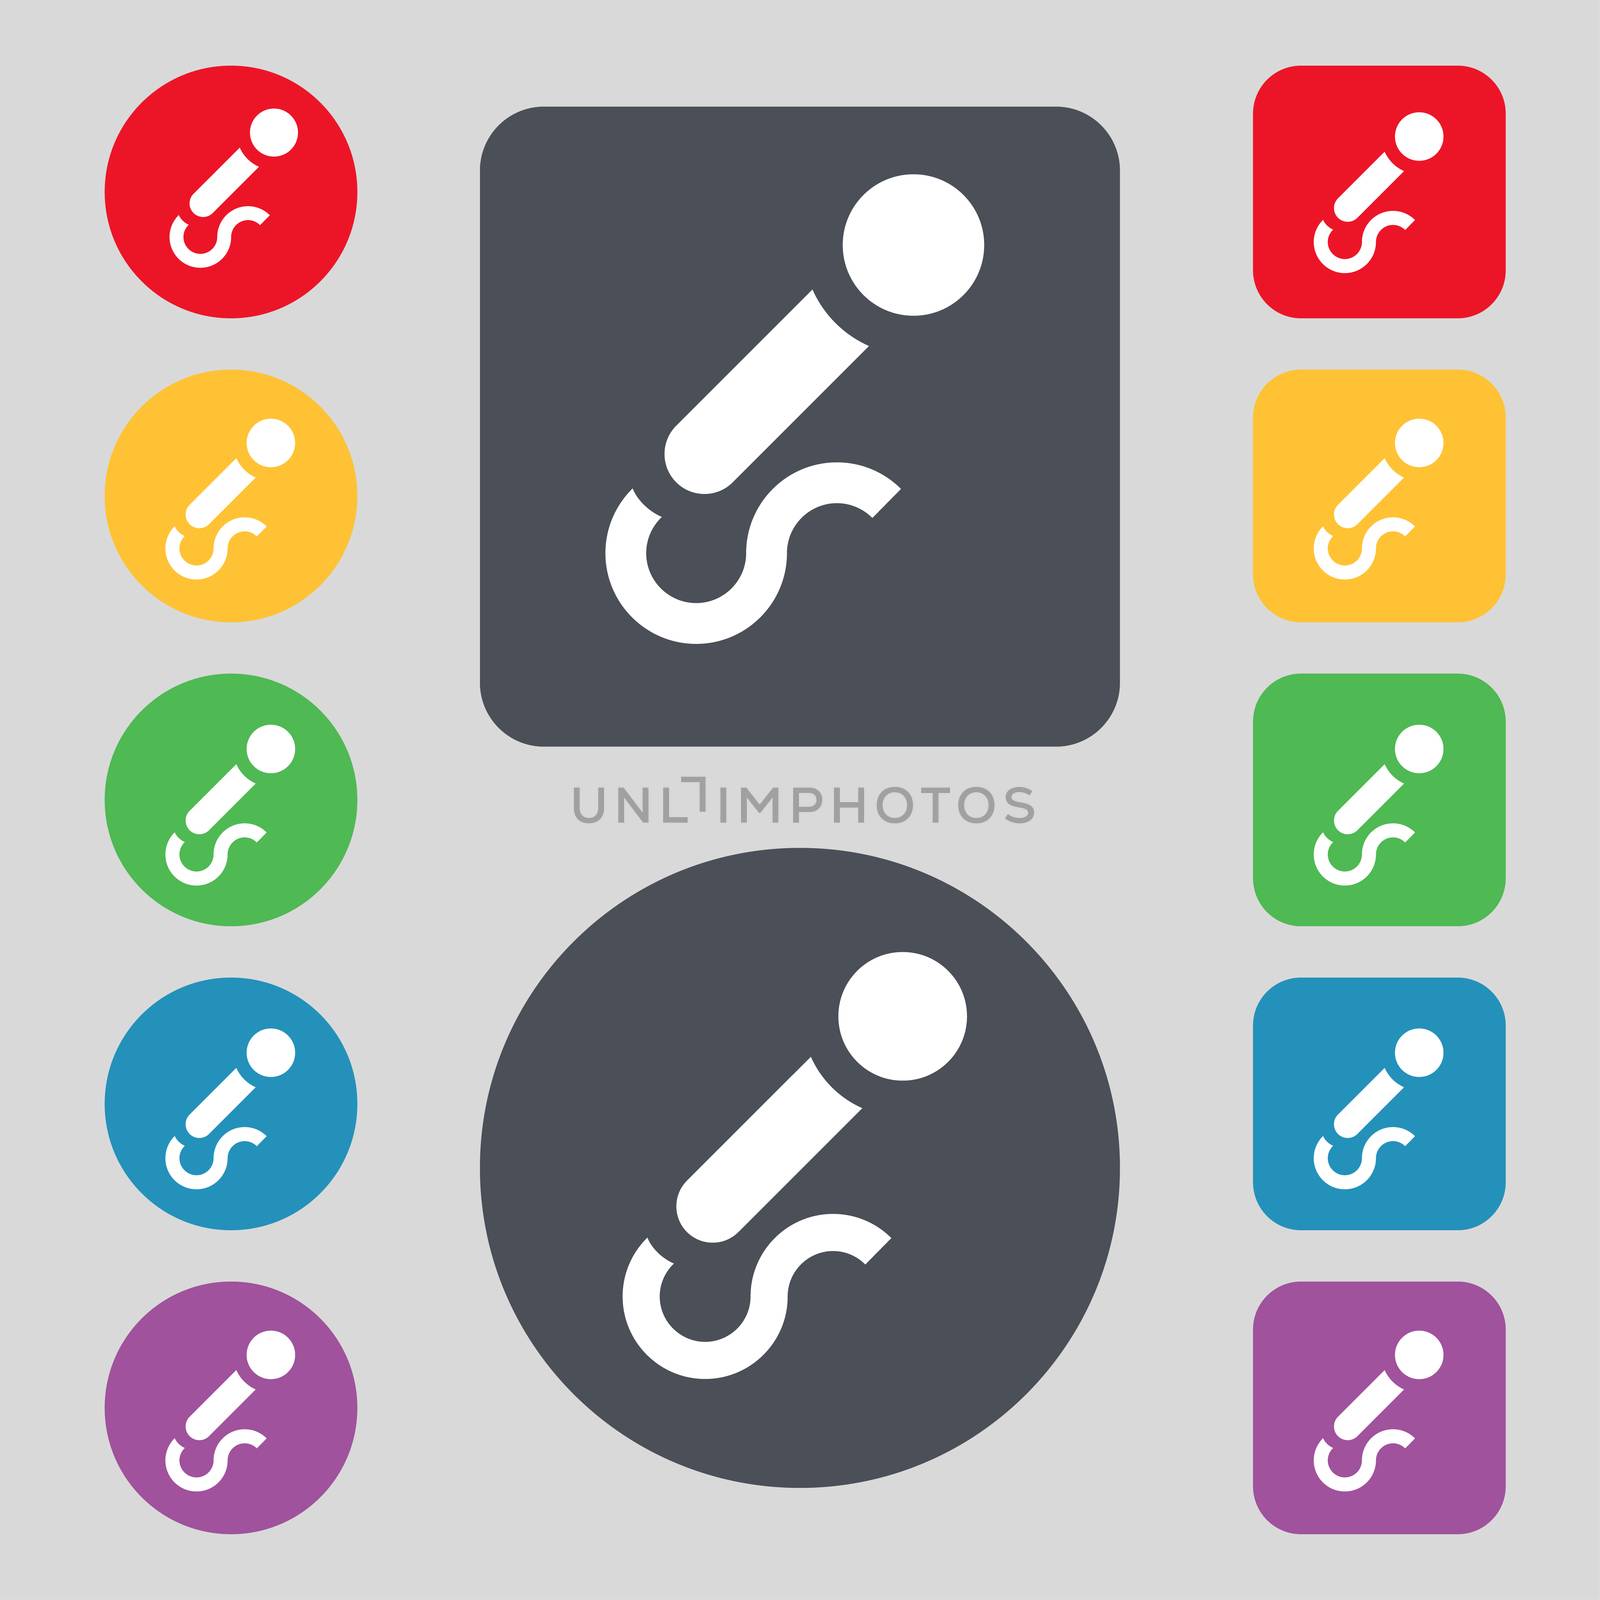 microphone icon sign. A set of 12 colored buttons. Flat design. illustration